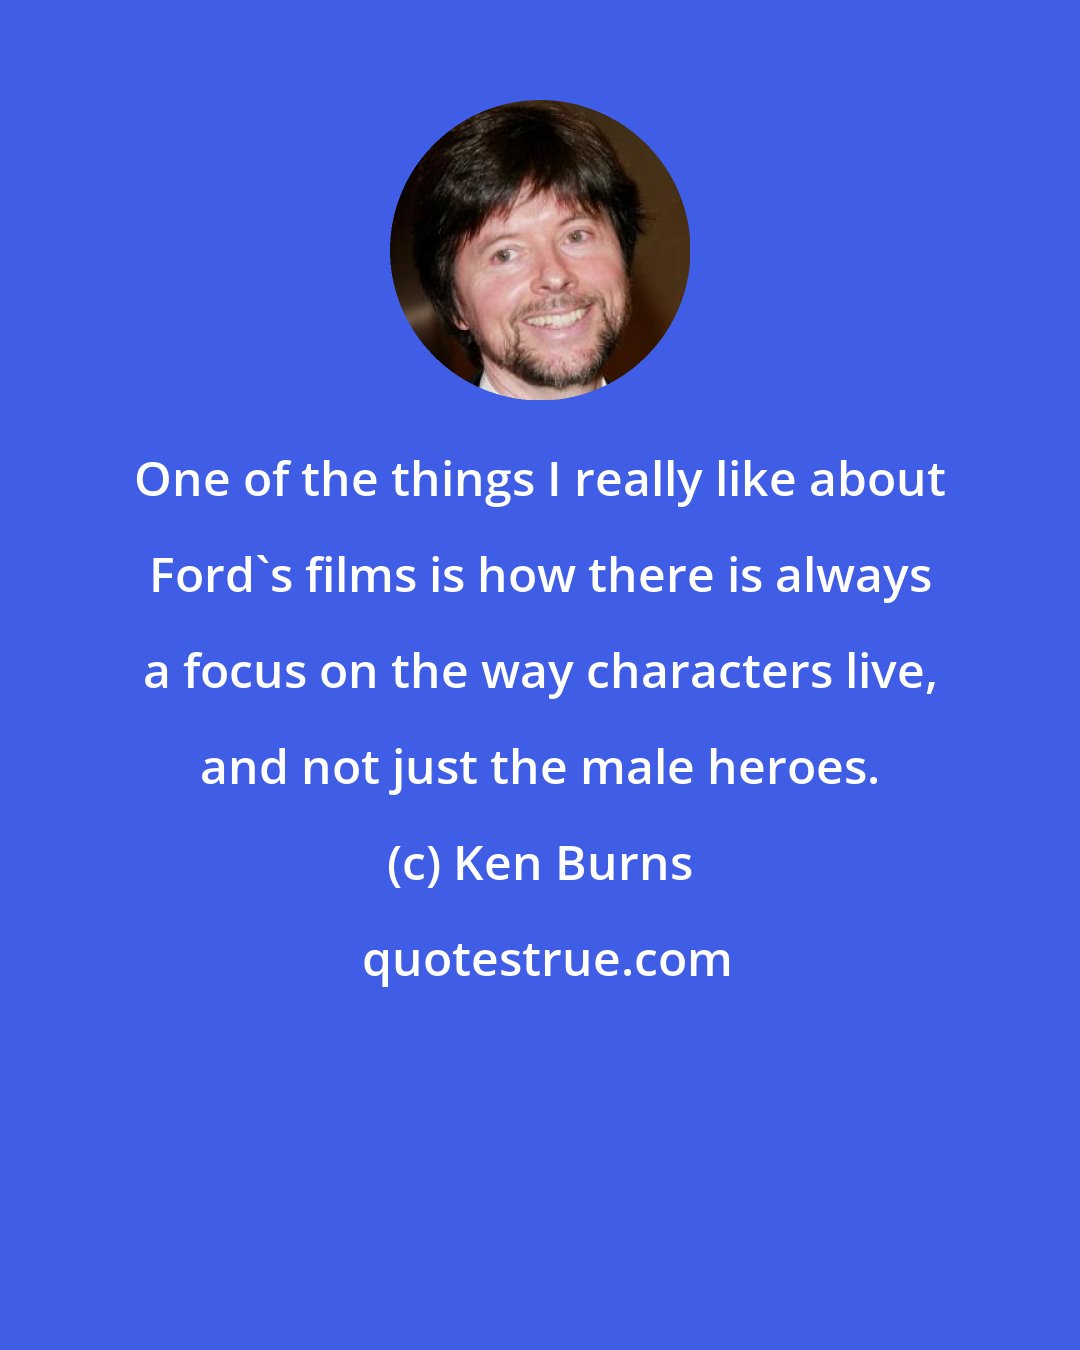 Ken Burns: One of the things I really like about Ford's films is how there is always a focus on the way characters live, and not just the male heroes.